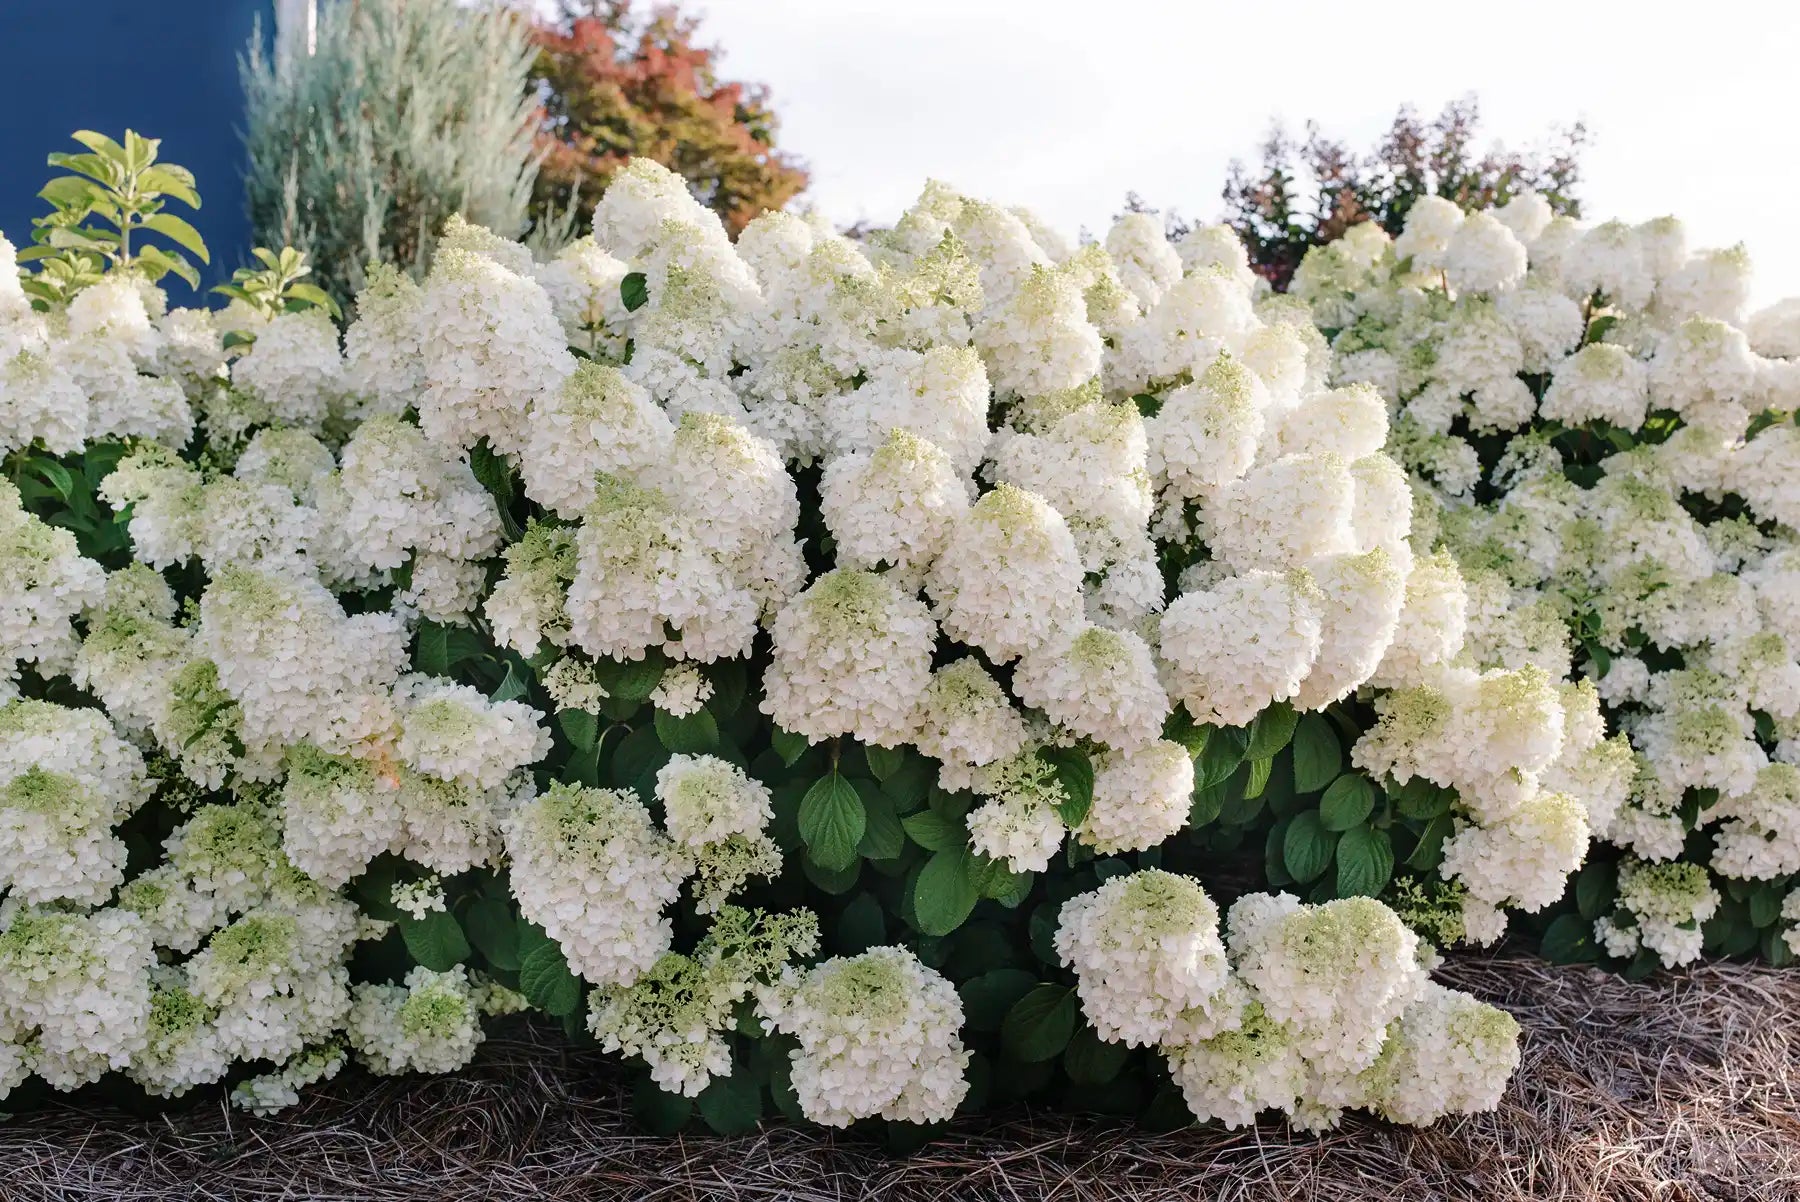 Little Hottie® Hydrangea in tightly packed clusters of conical shaped, creamy white blossoms that overtake the dark green leaves beneath. 